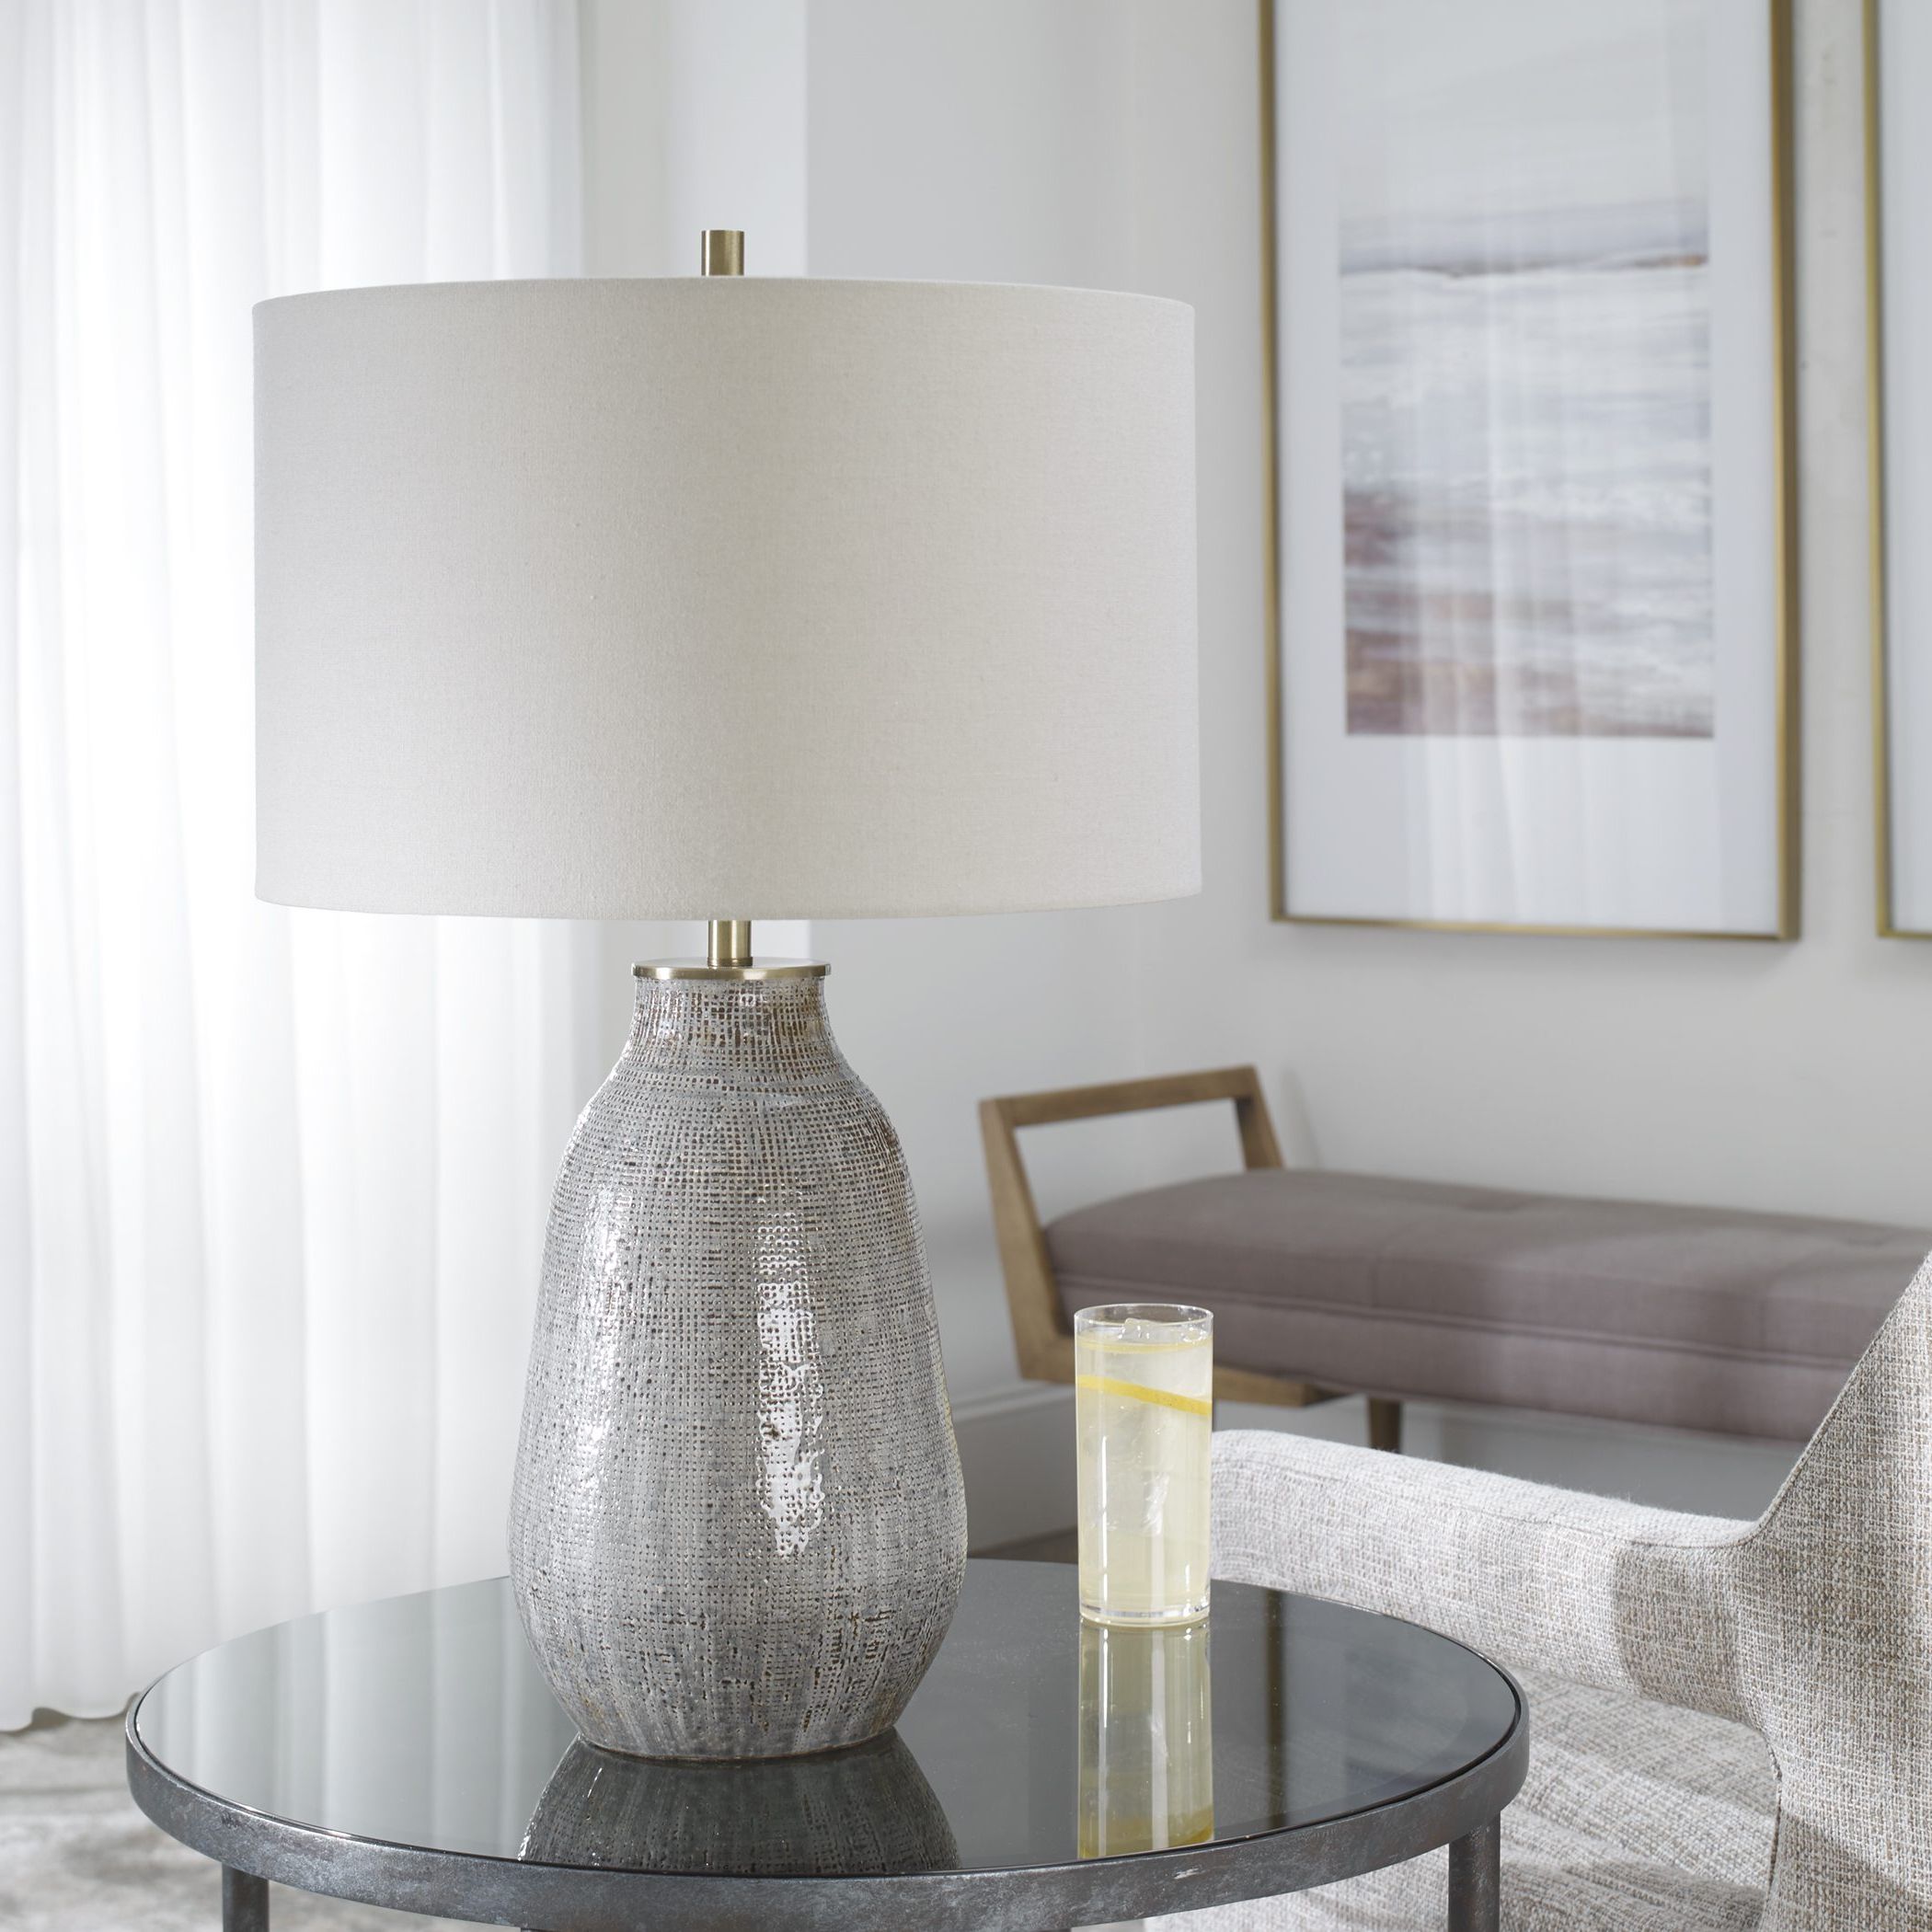 Uttermost Monacan Gray Textured Table Lamp – Sacksteder's Interiors Catalog Intended For Most Current Grey Textured Standing Lamps (View 12 of 15)